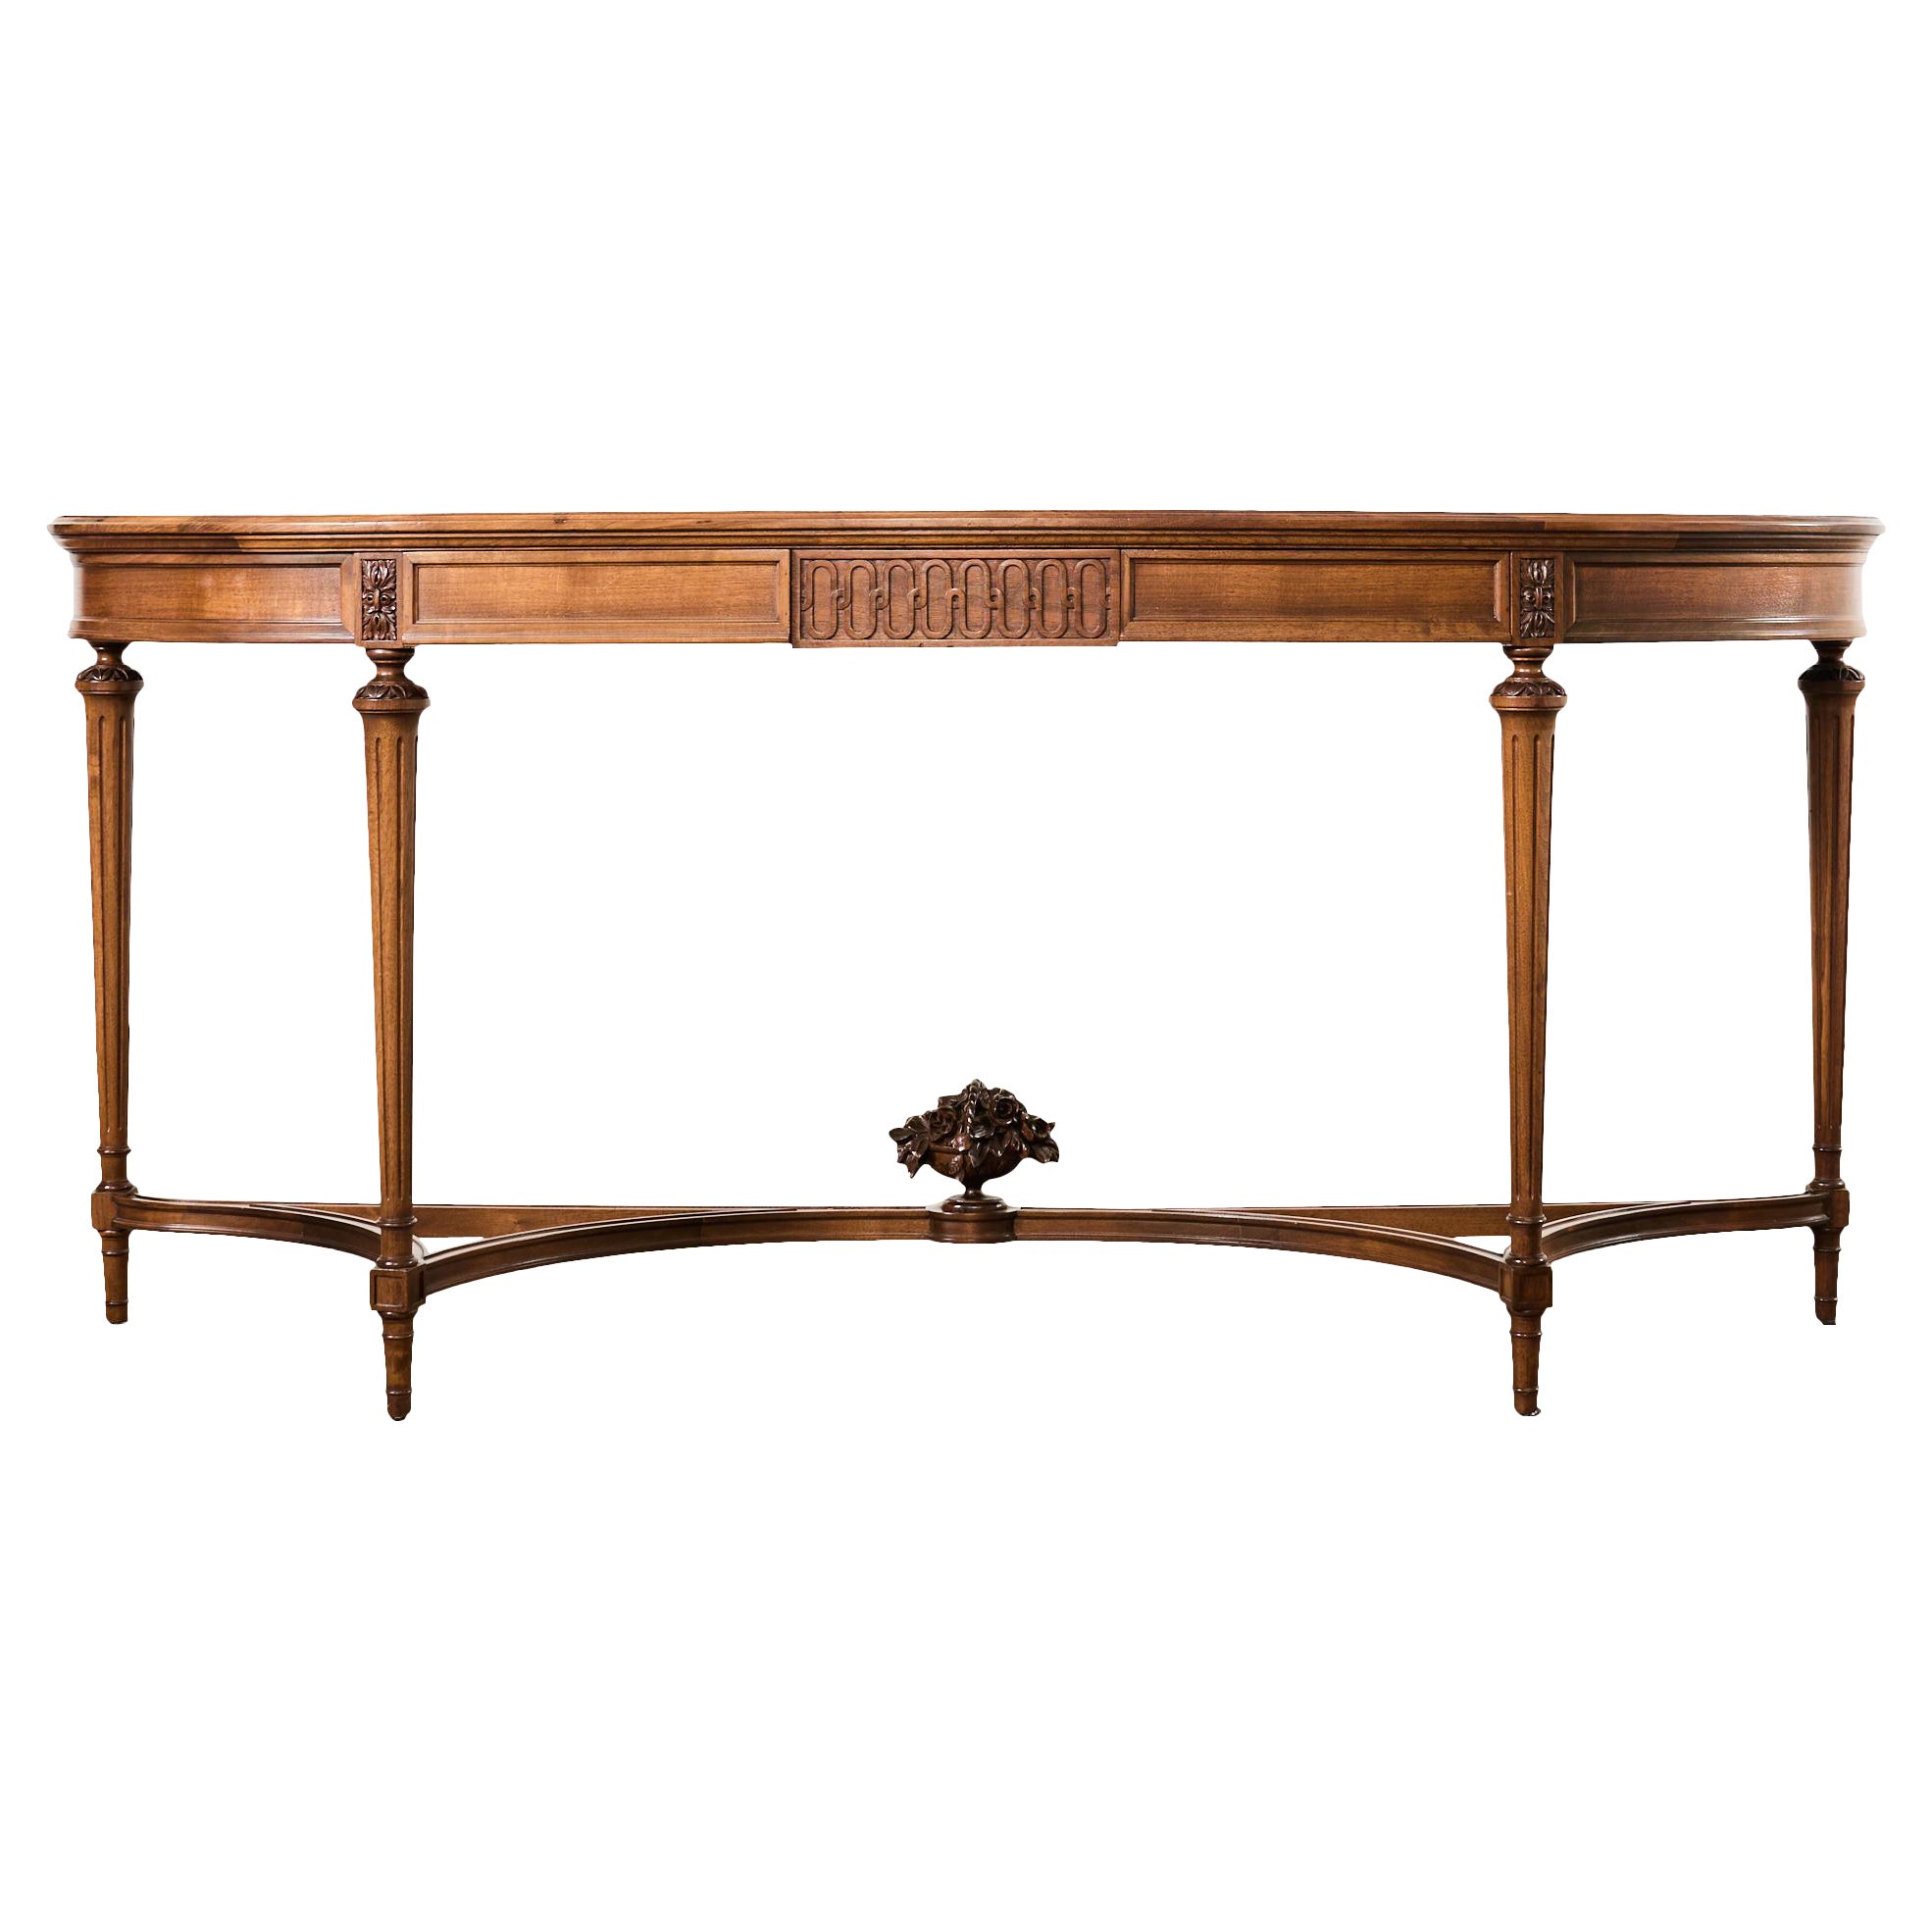 Grand French Louis XVI Style Mahogany Demilune Console Server For Sale